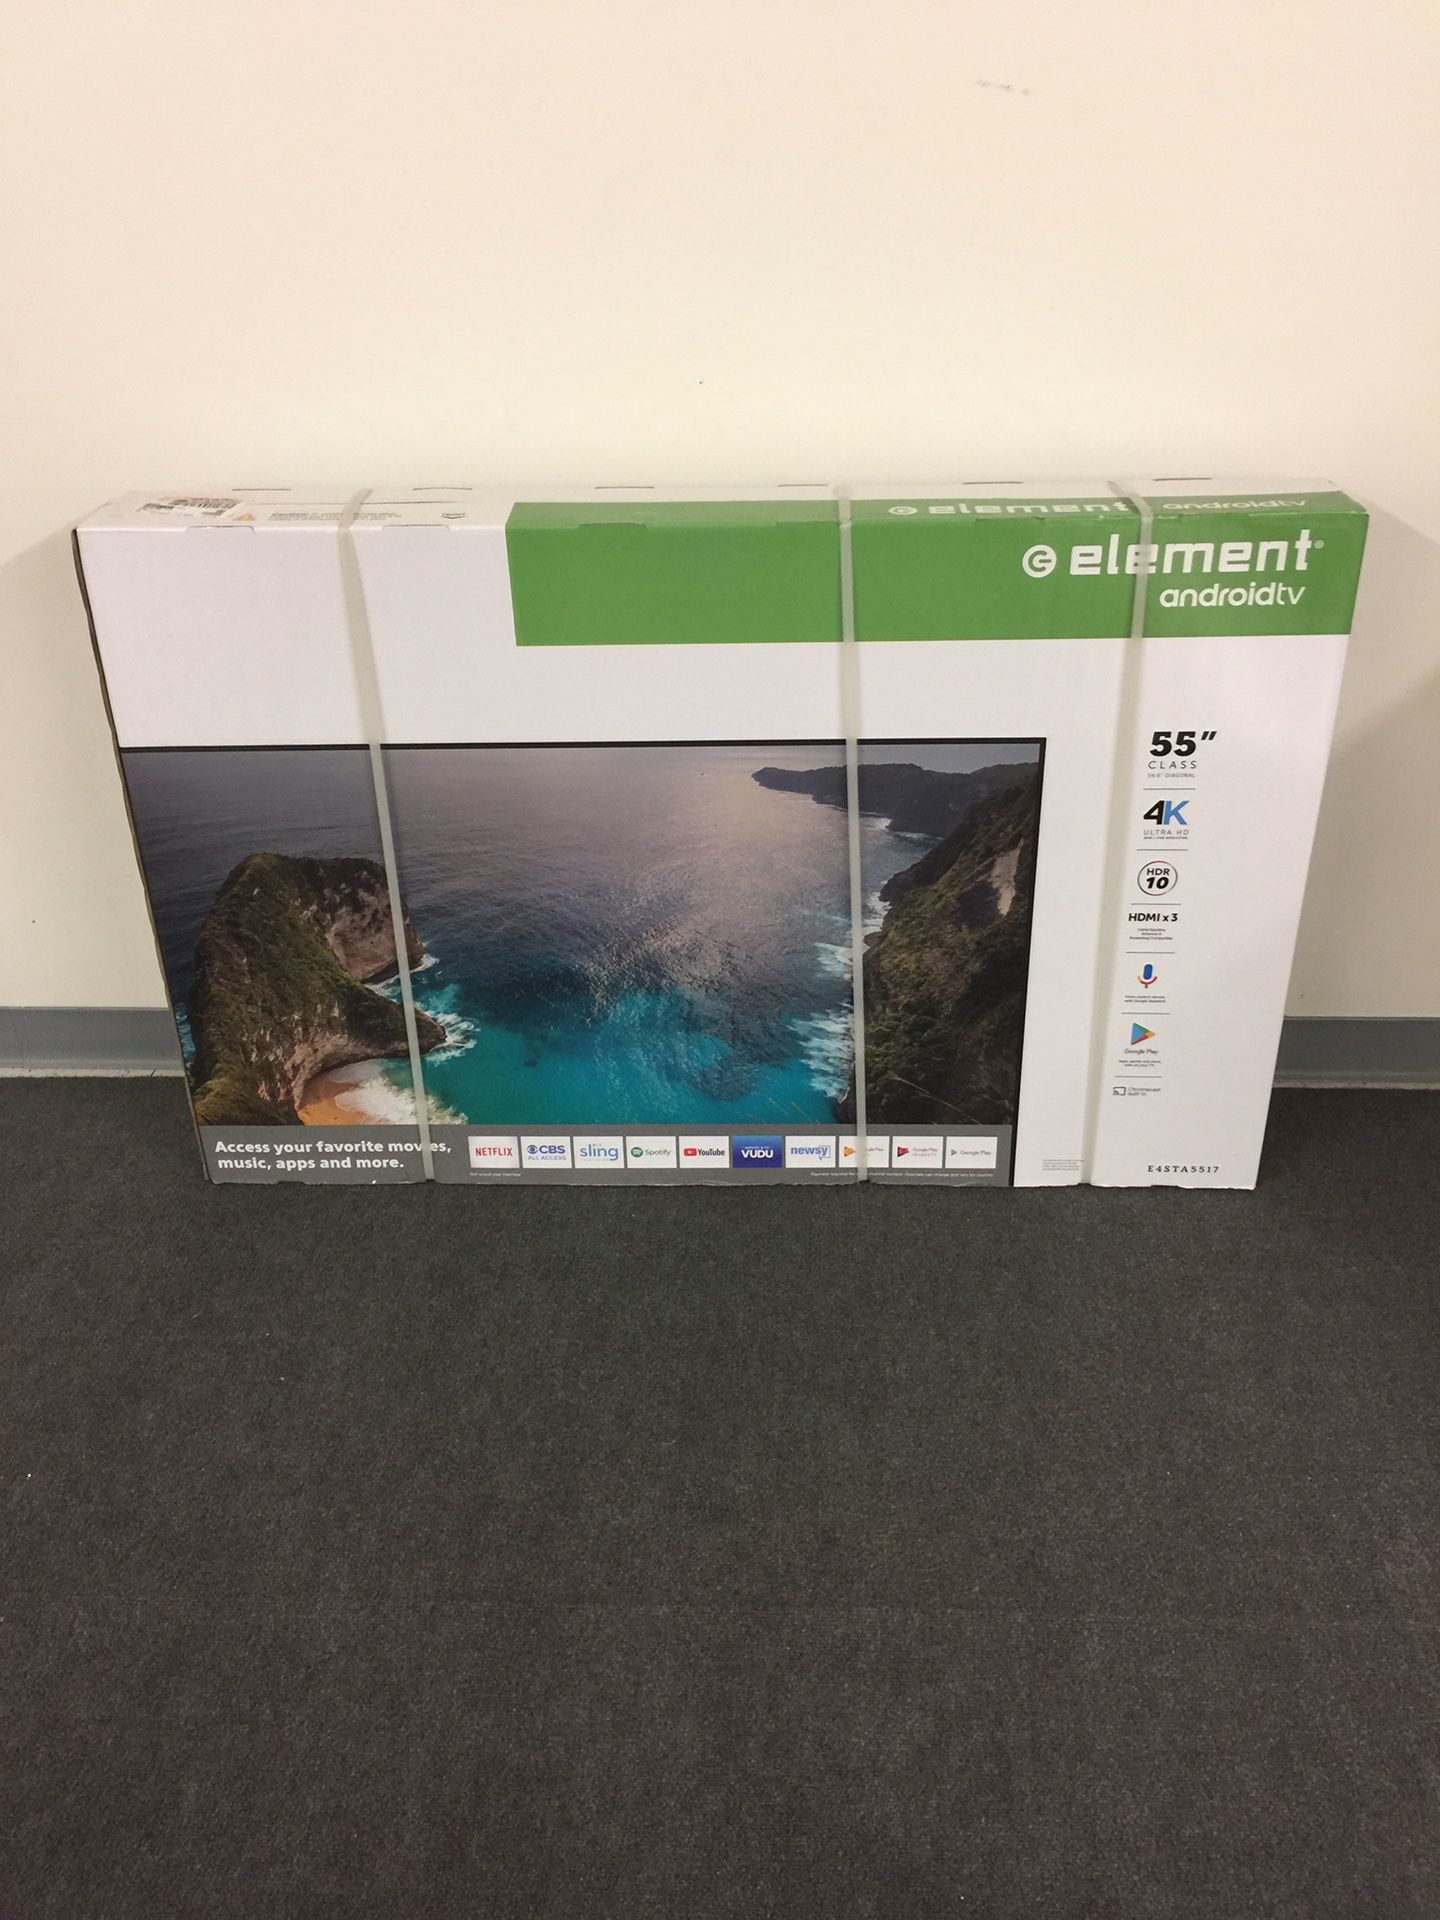 New Element 55” 4K UHD Smart Android TV with Google Assistant